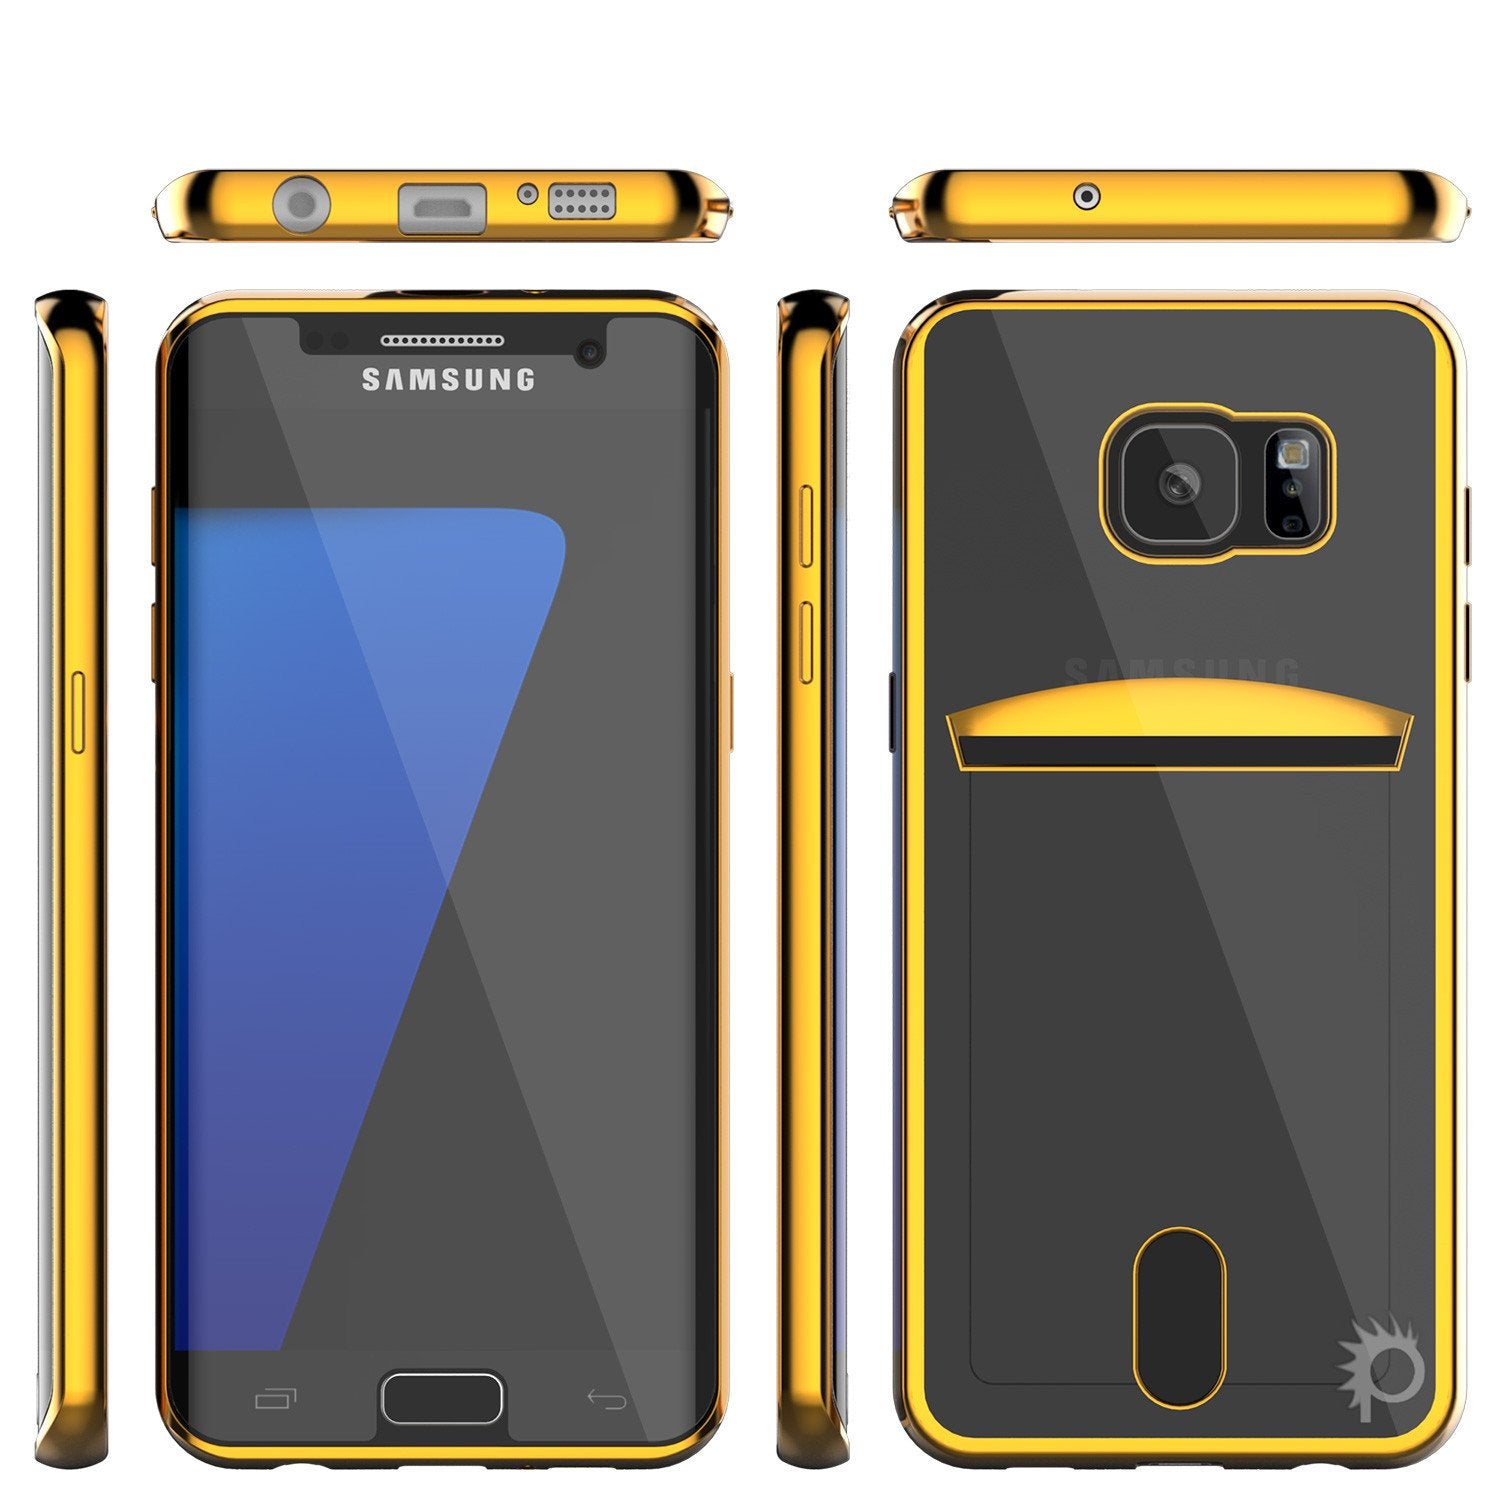 Galaxy S7 Case, PUNKCASE® LUCID Gold Series | Card Slot | SHIELD Screen Protector | Ultra fit - PunkCase NZ